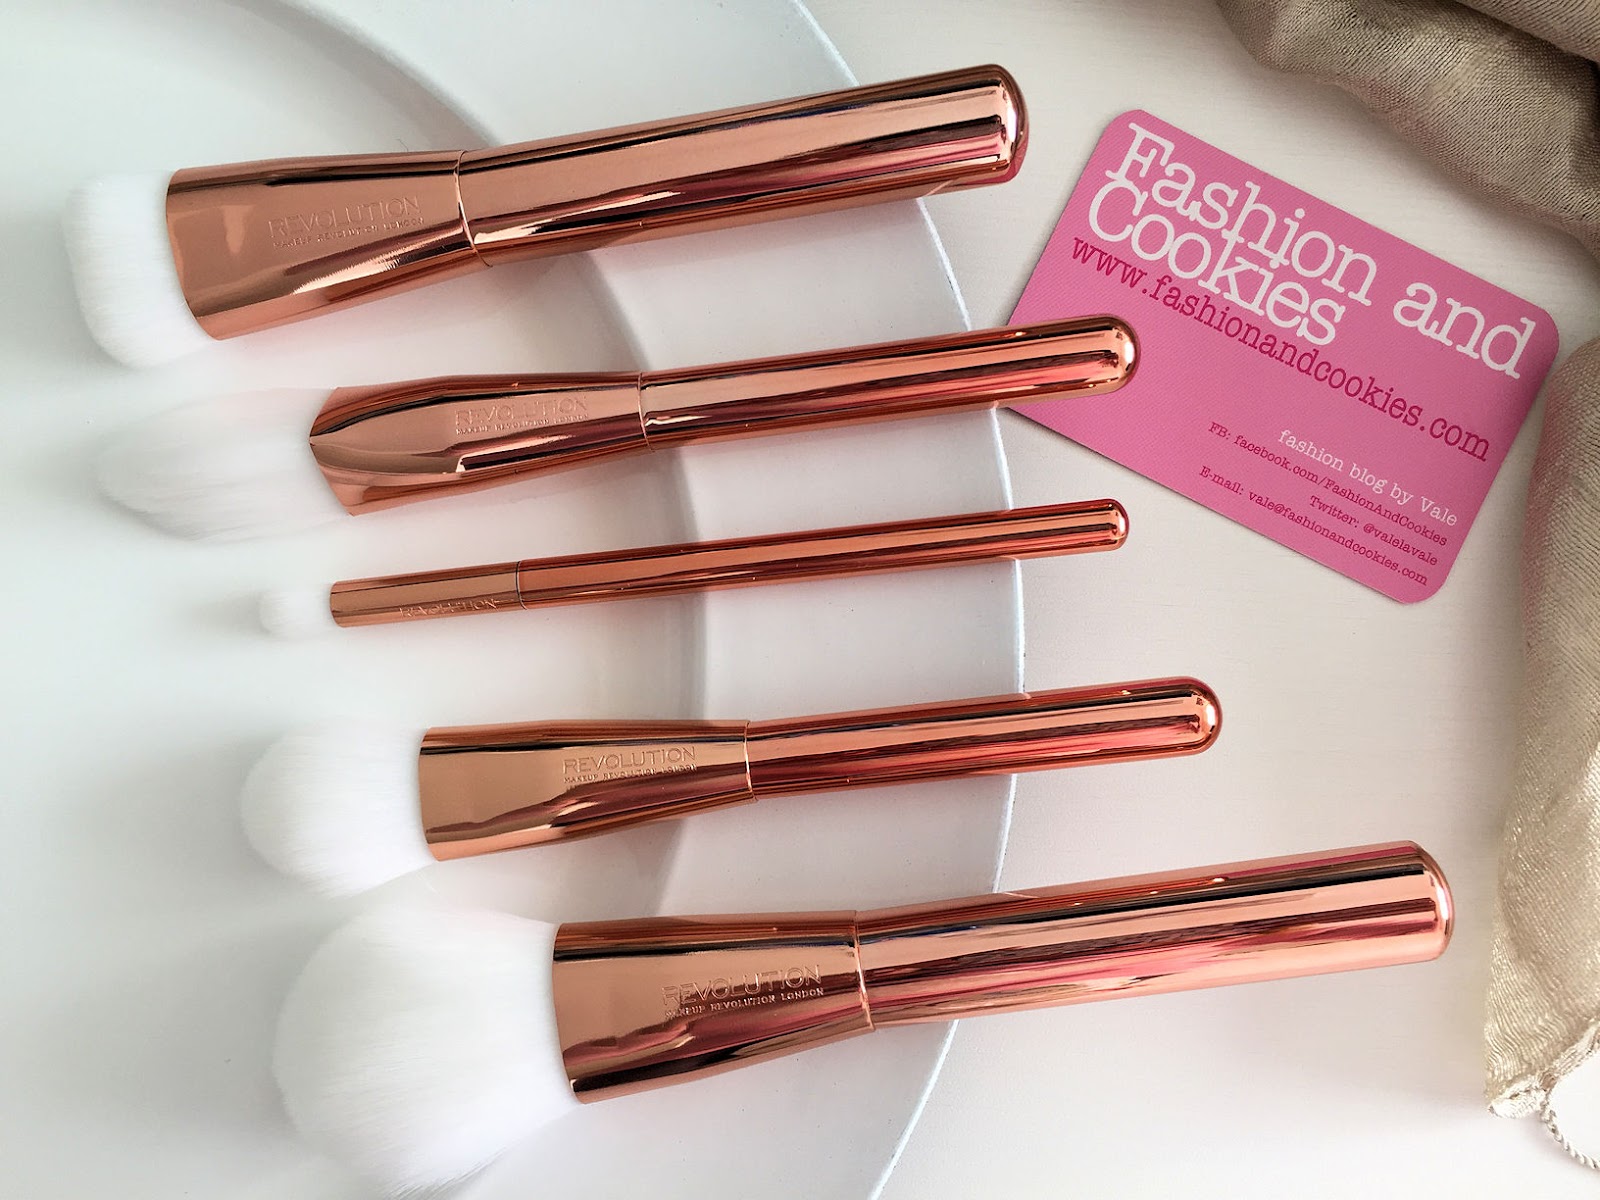 Makeup Revolution Ultra Metals Revolution makeup brushes review on Fashion and Cookies beauty blog, beauty blogger